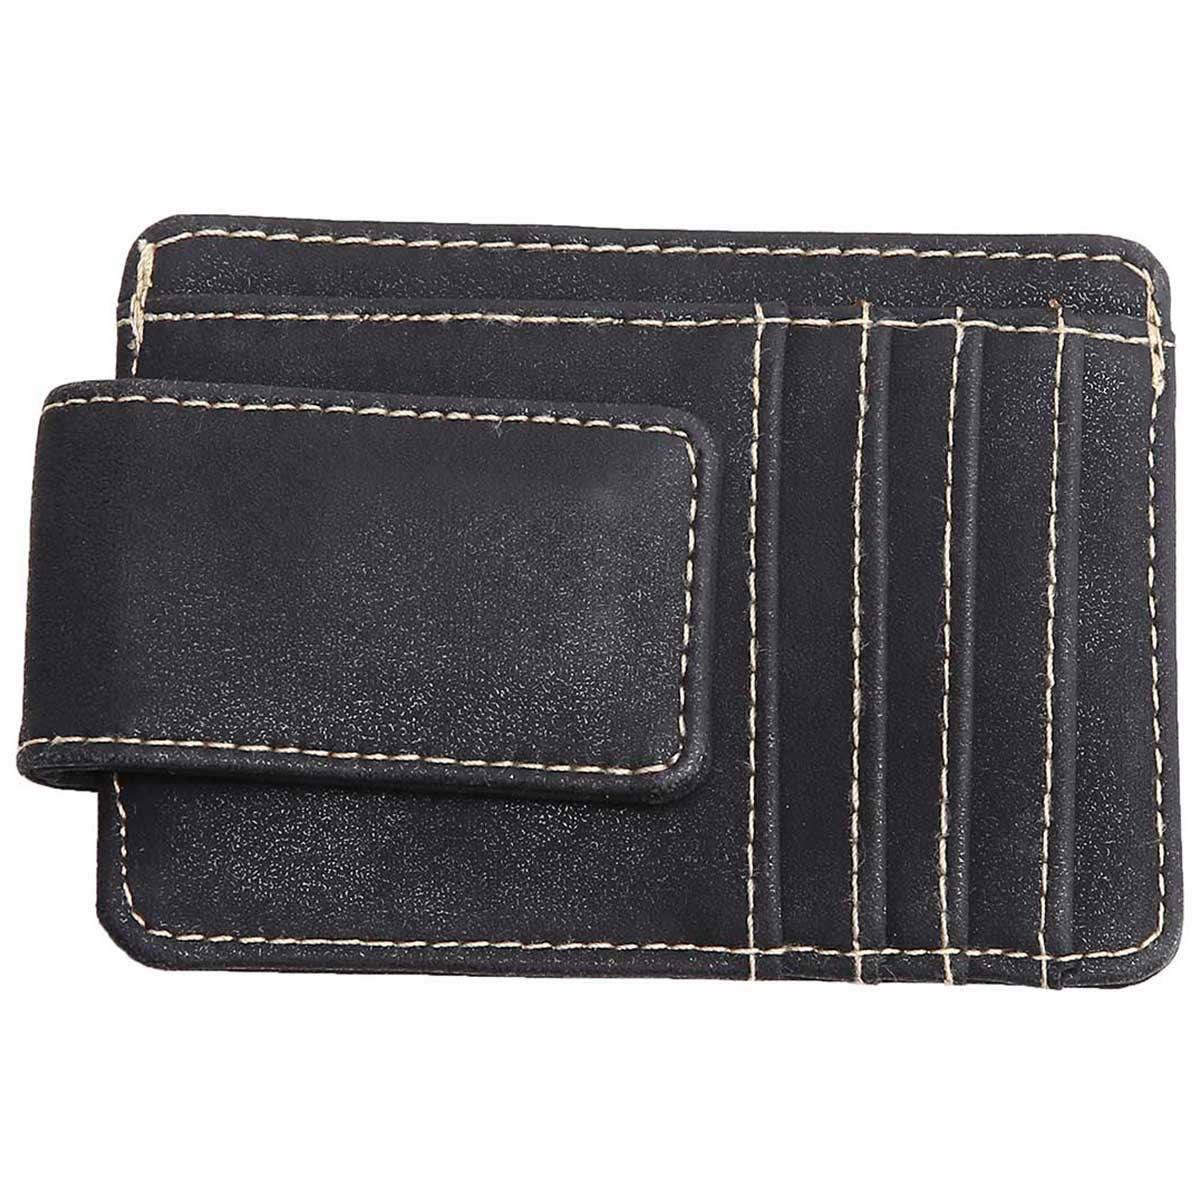 Money Clip With Card Slots And Bill Holder: Brown